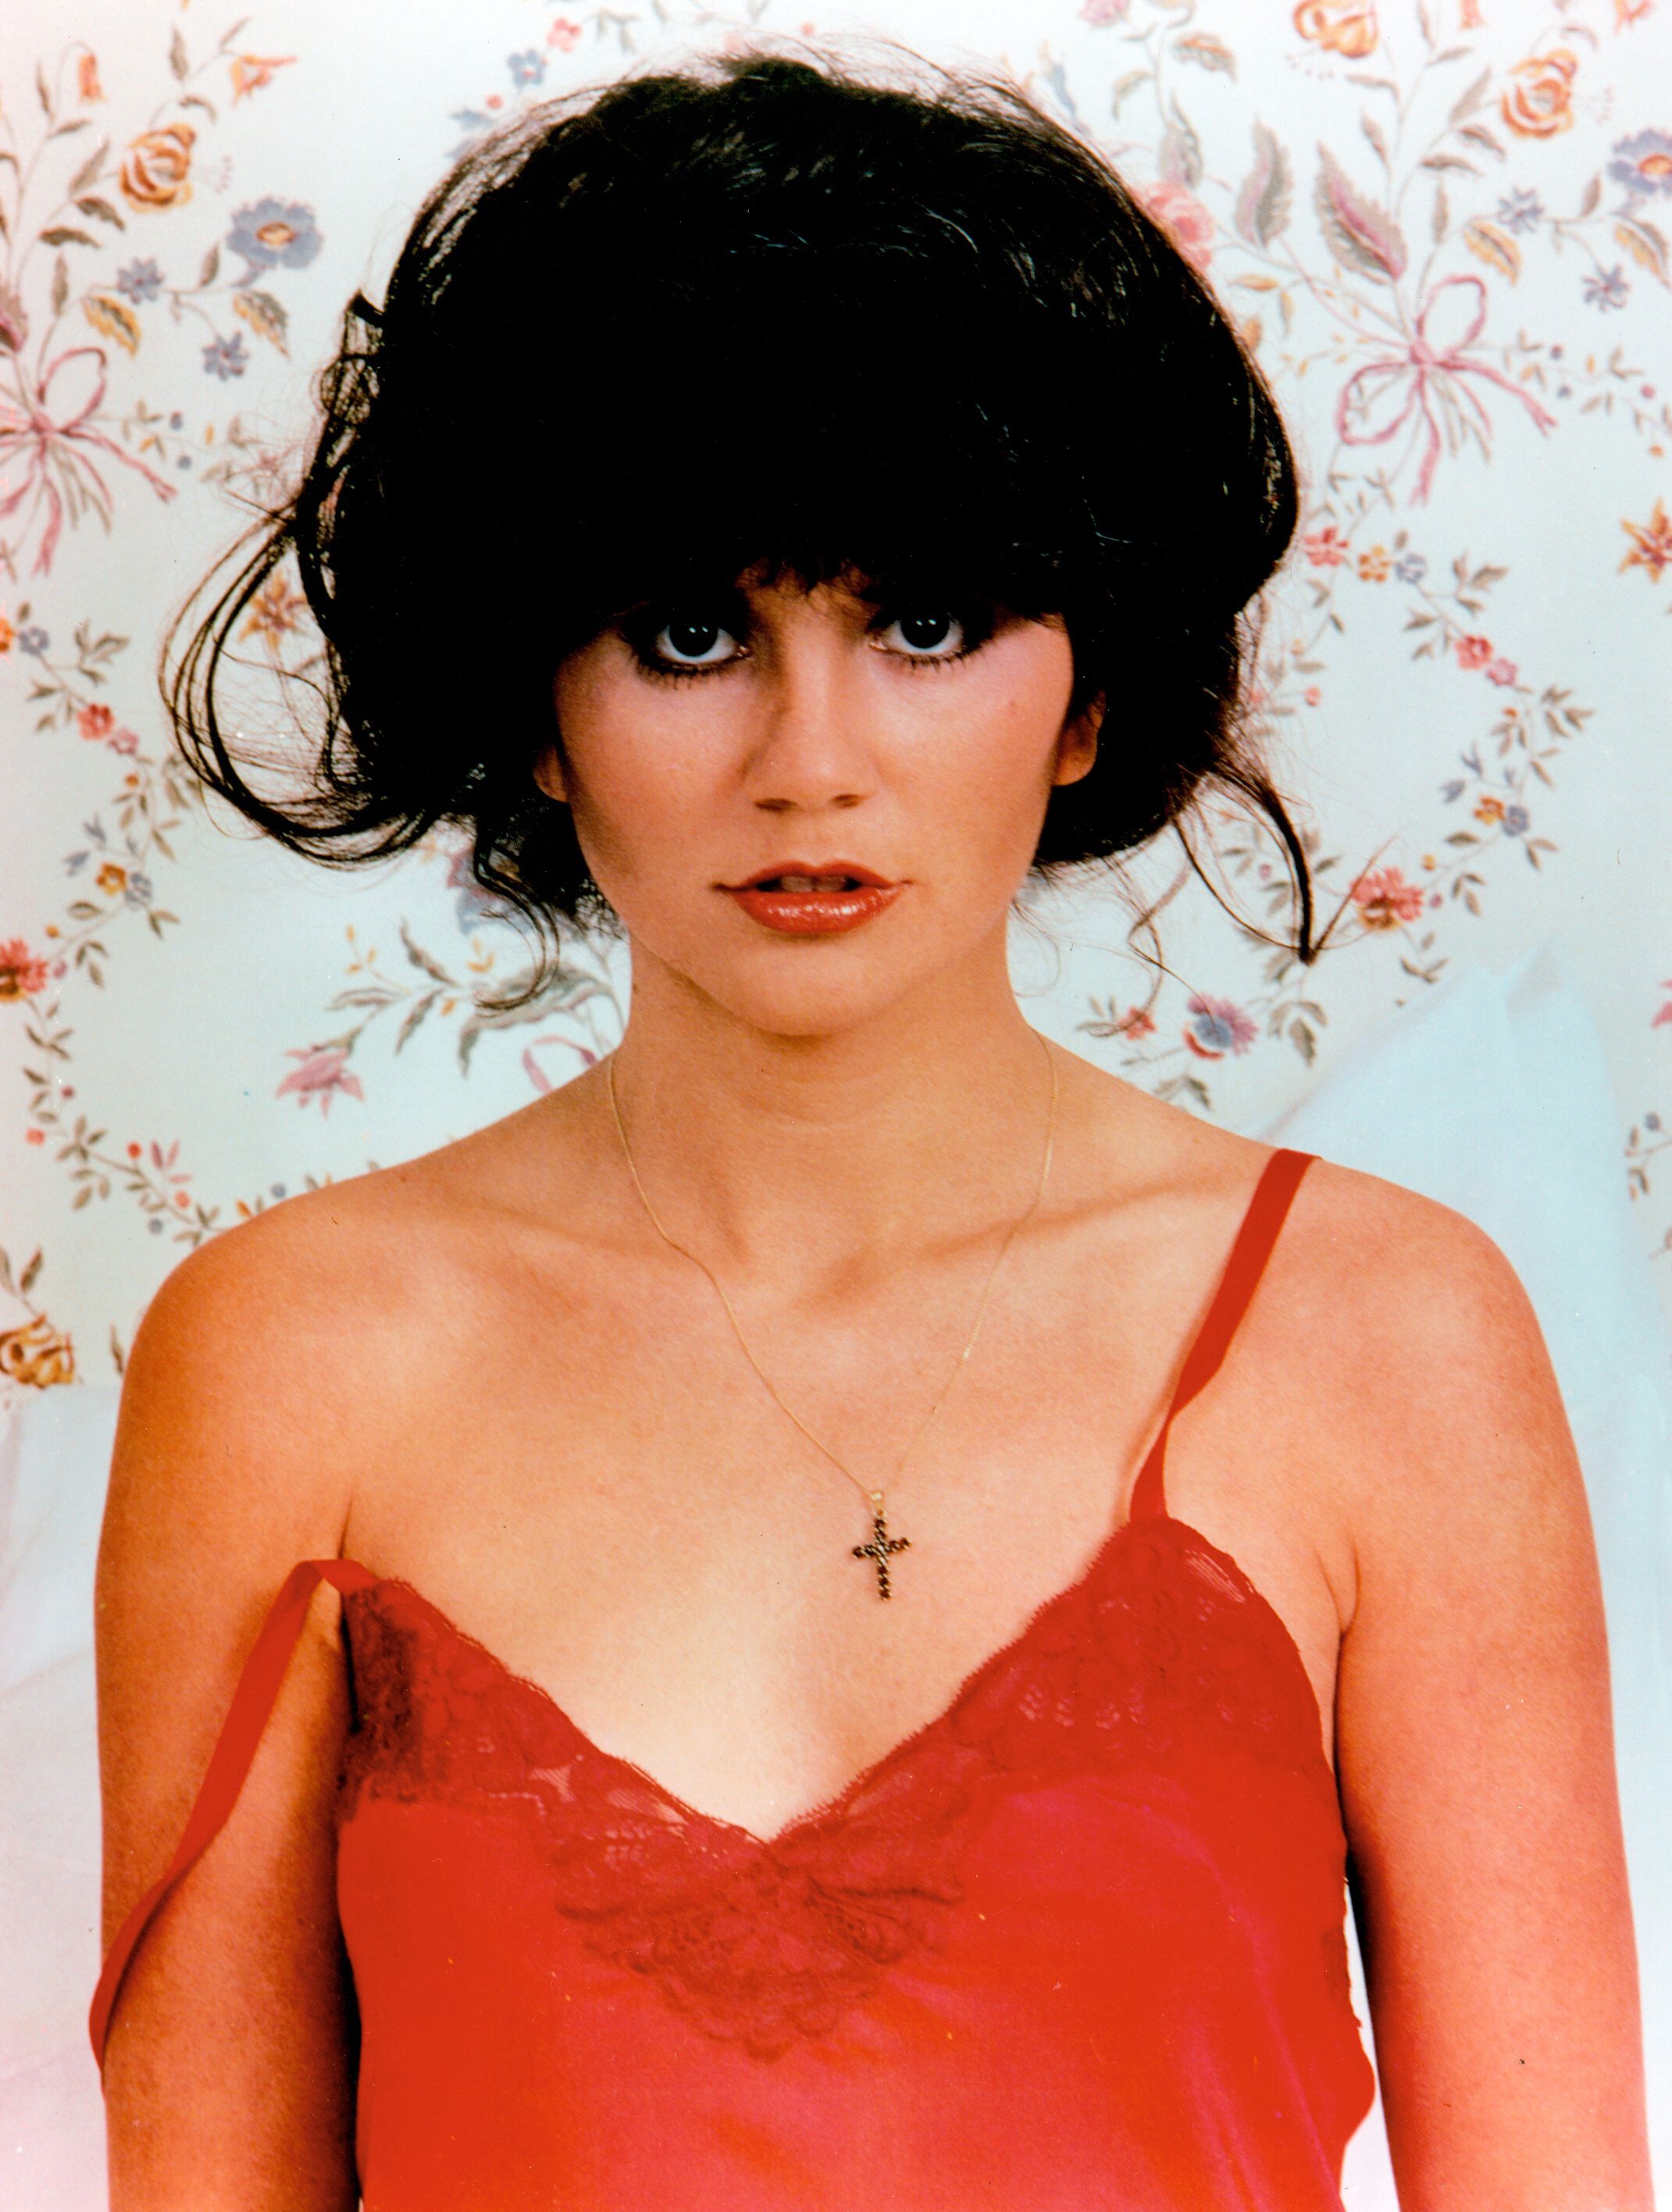 Linda Ronstadt on the rare brain condition that ended her singing career